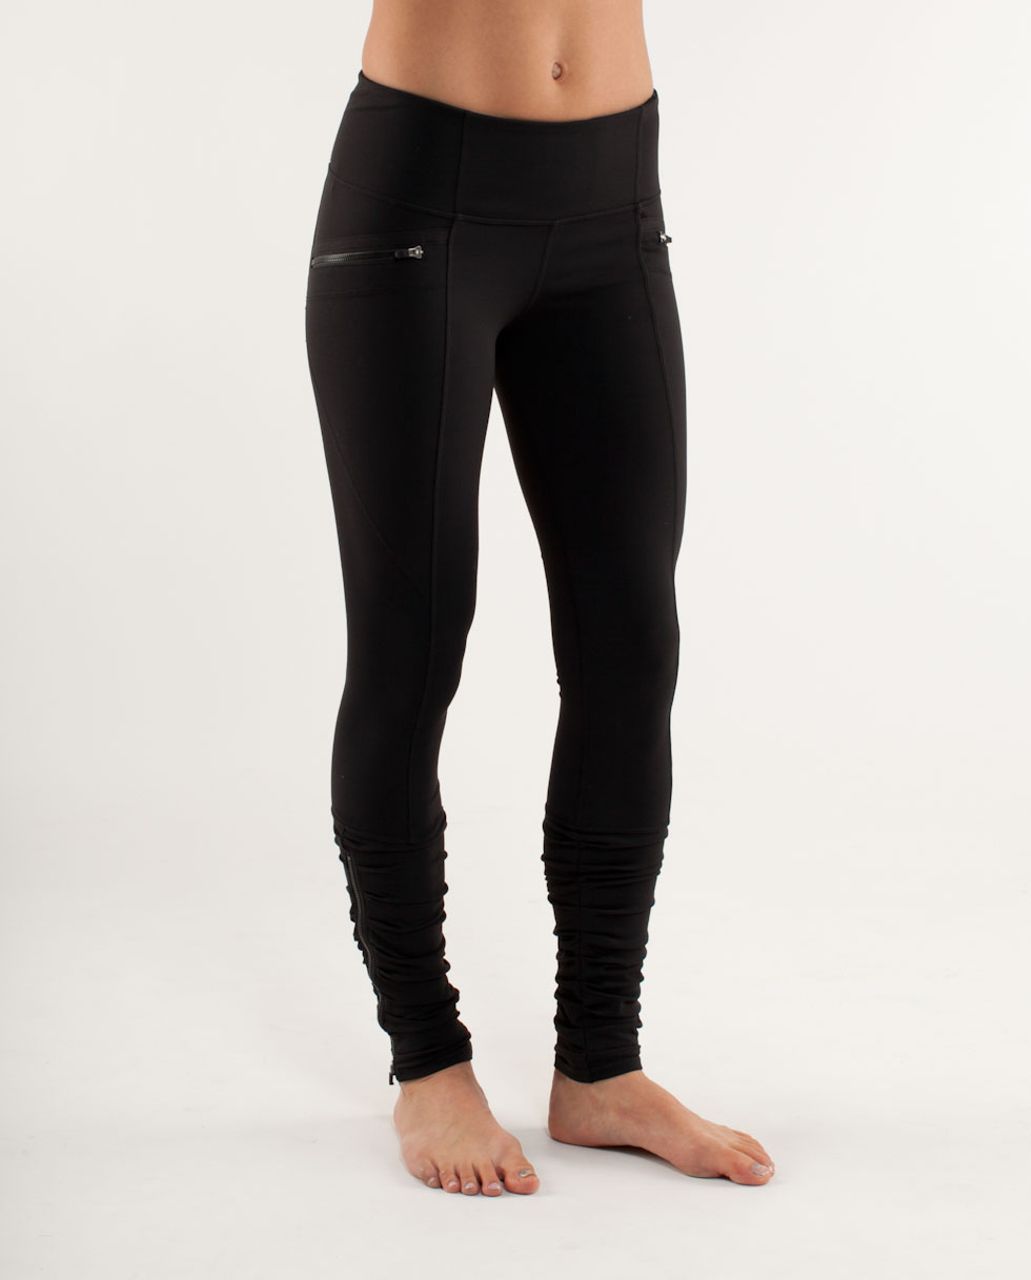 lululemon athletica, Pants & Jumpsuits, Lululemon Ruched Side Black  Leggings With Footie Covers Size 2